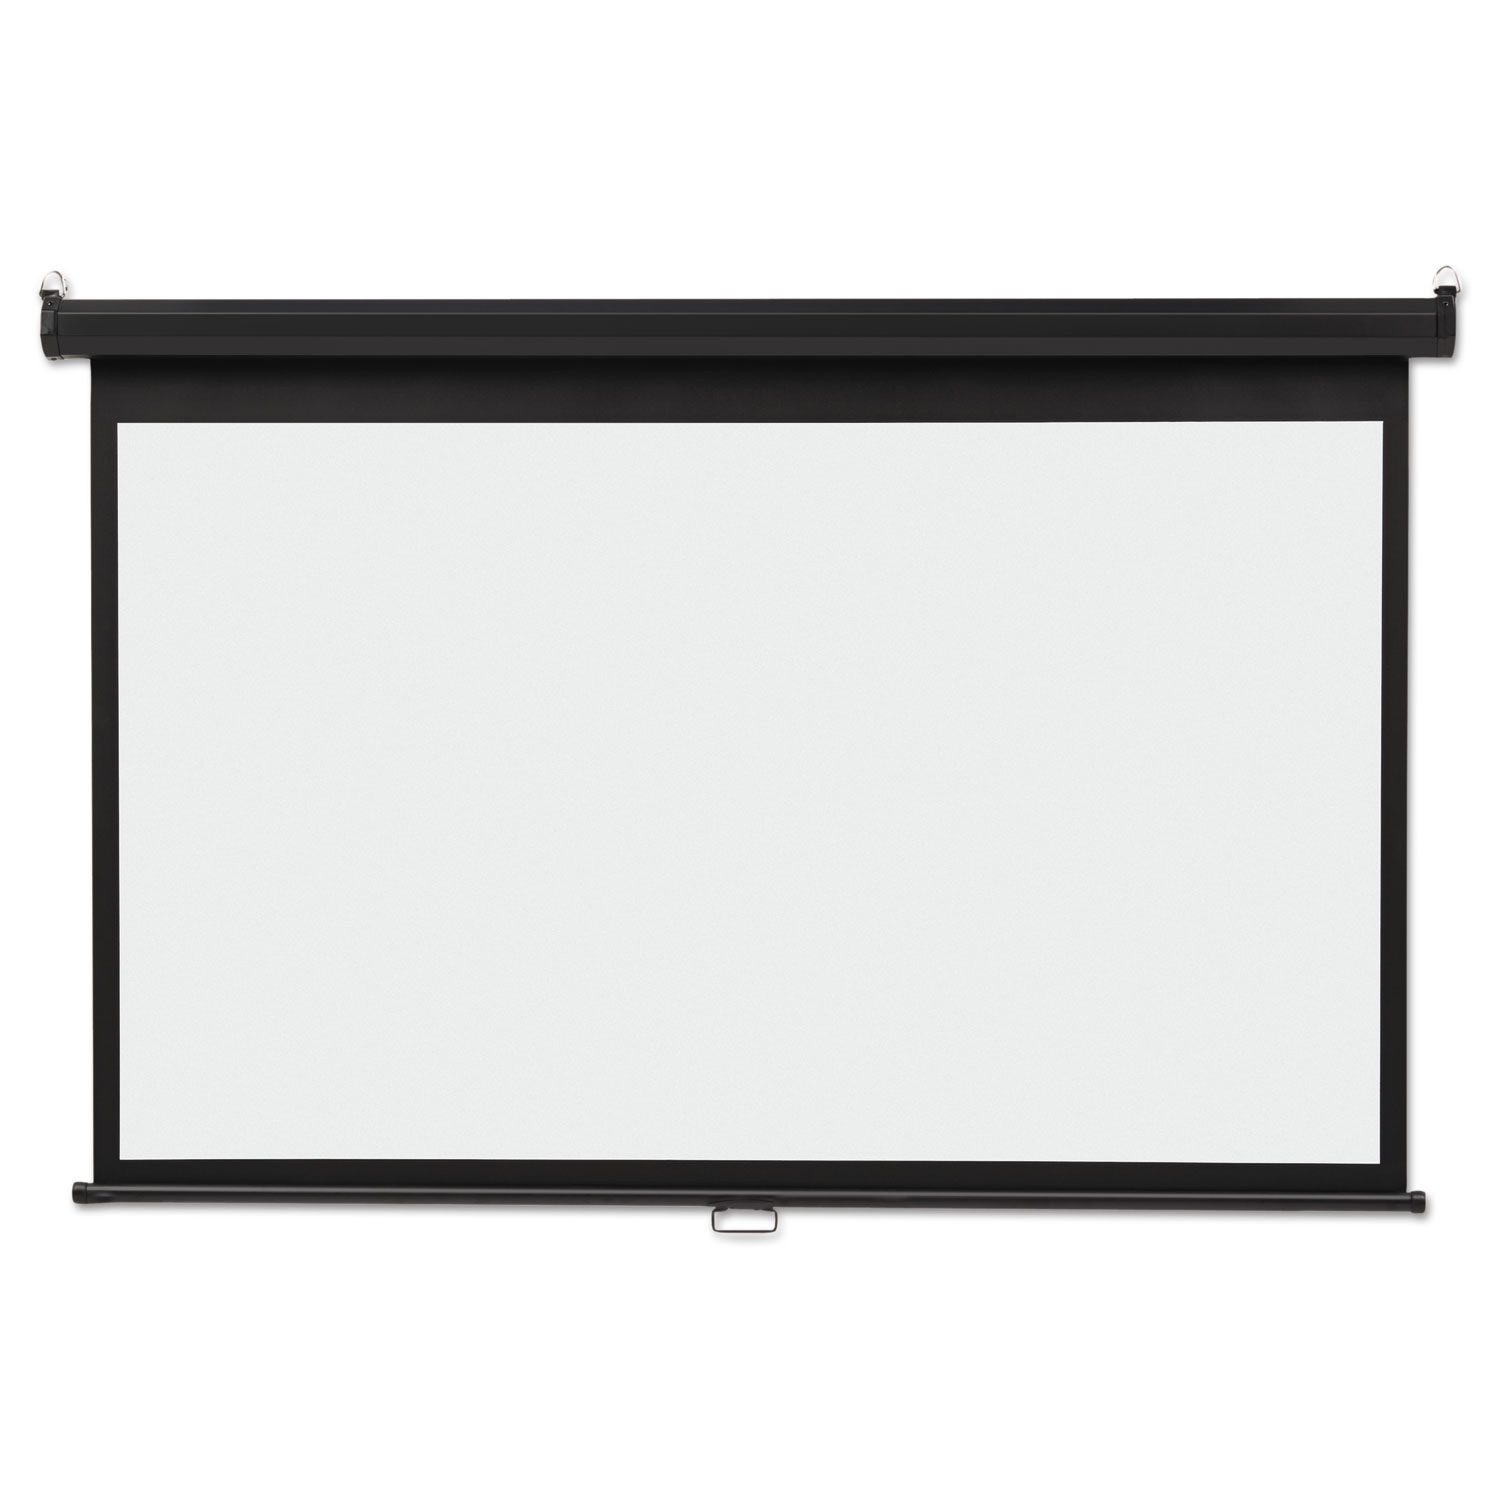 Wide Format Wall Mount Projection Screen, 45 x 80, White